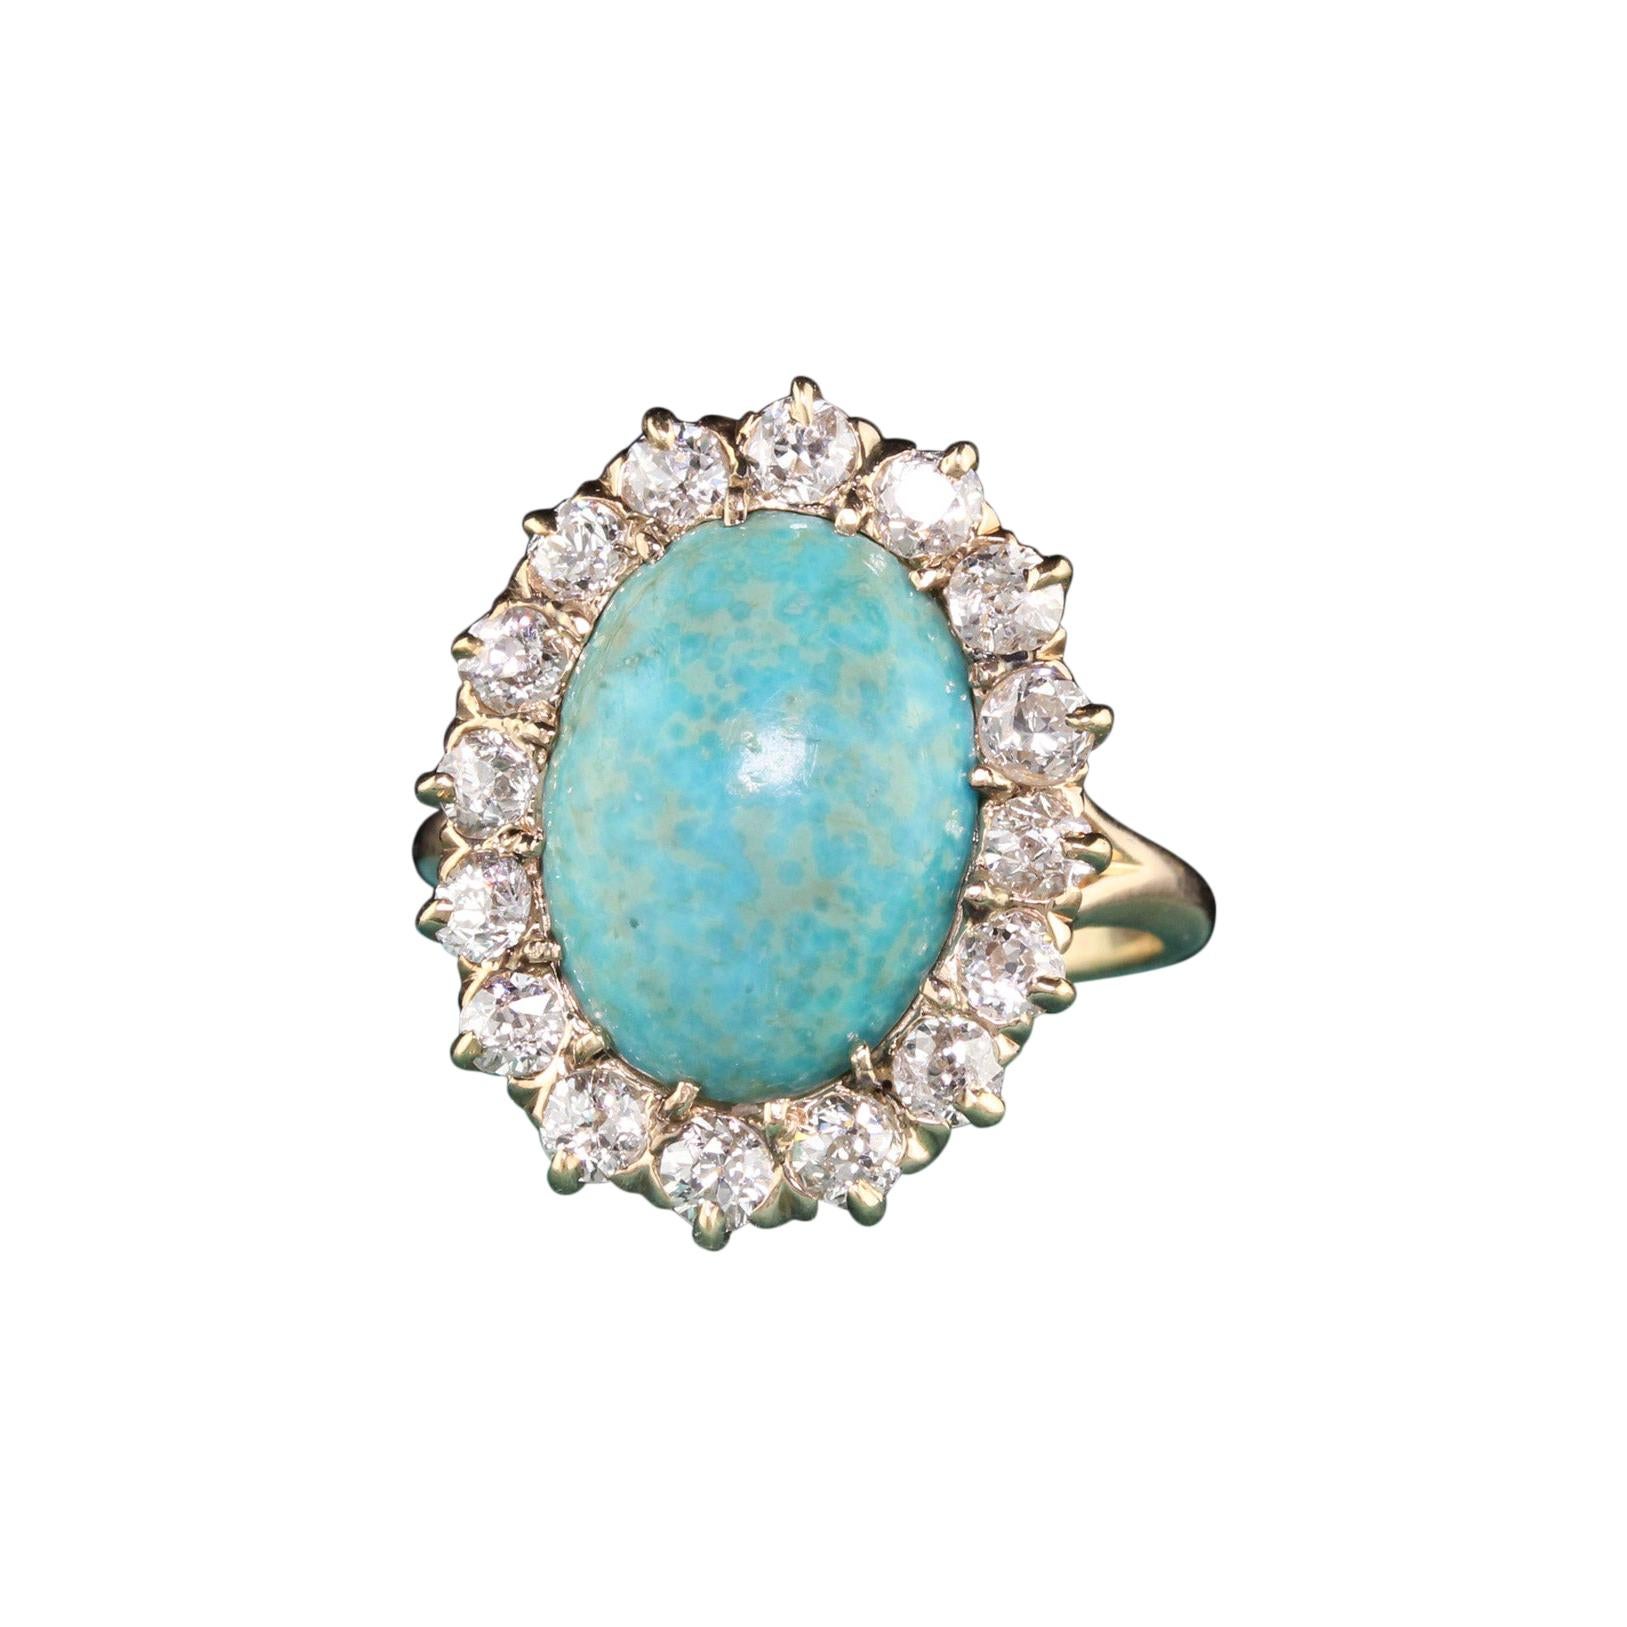 Antique Victorian 14 Karat Yellow Gold Old Miner Cut Diamonds and Turquoise Ring